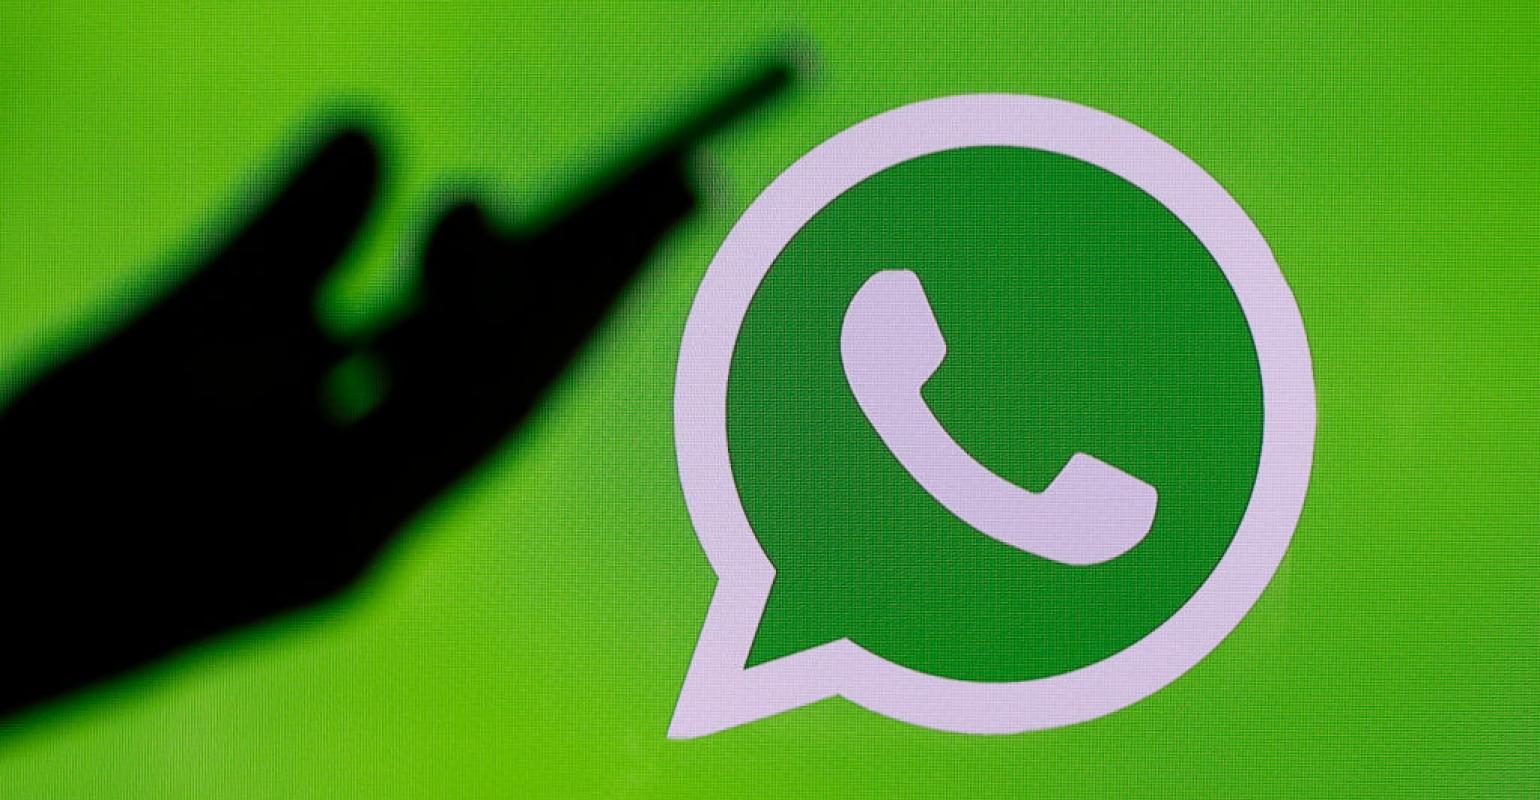 Why the WhatsApp Security Flaw Should Make Enterprise IT Nervous | Data Center Knowledge